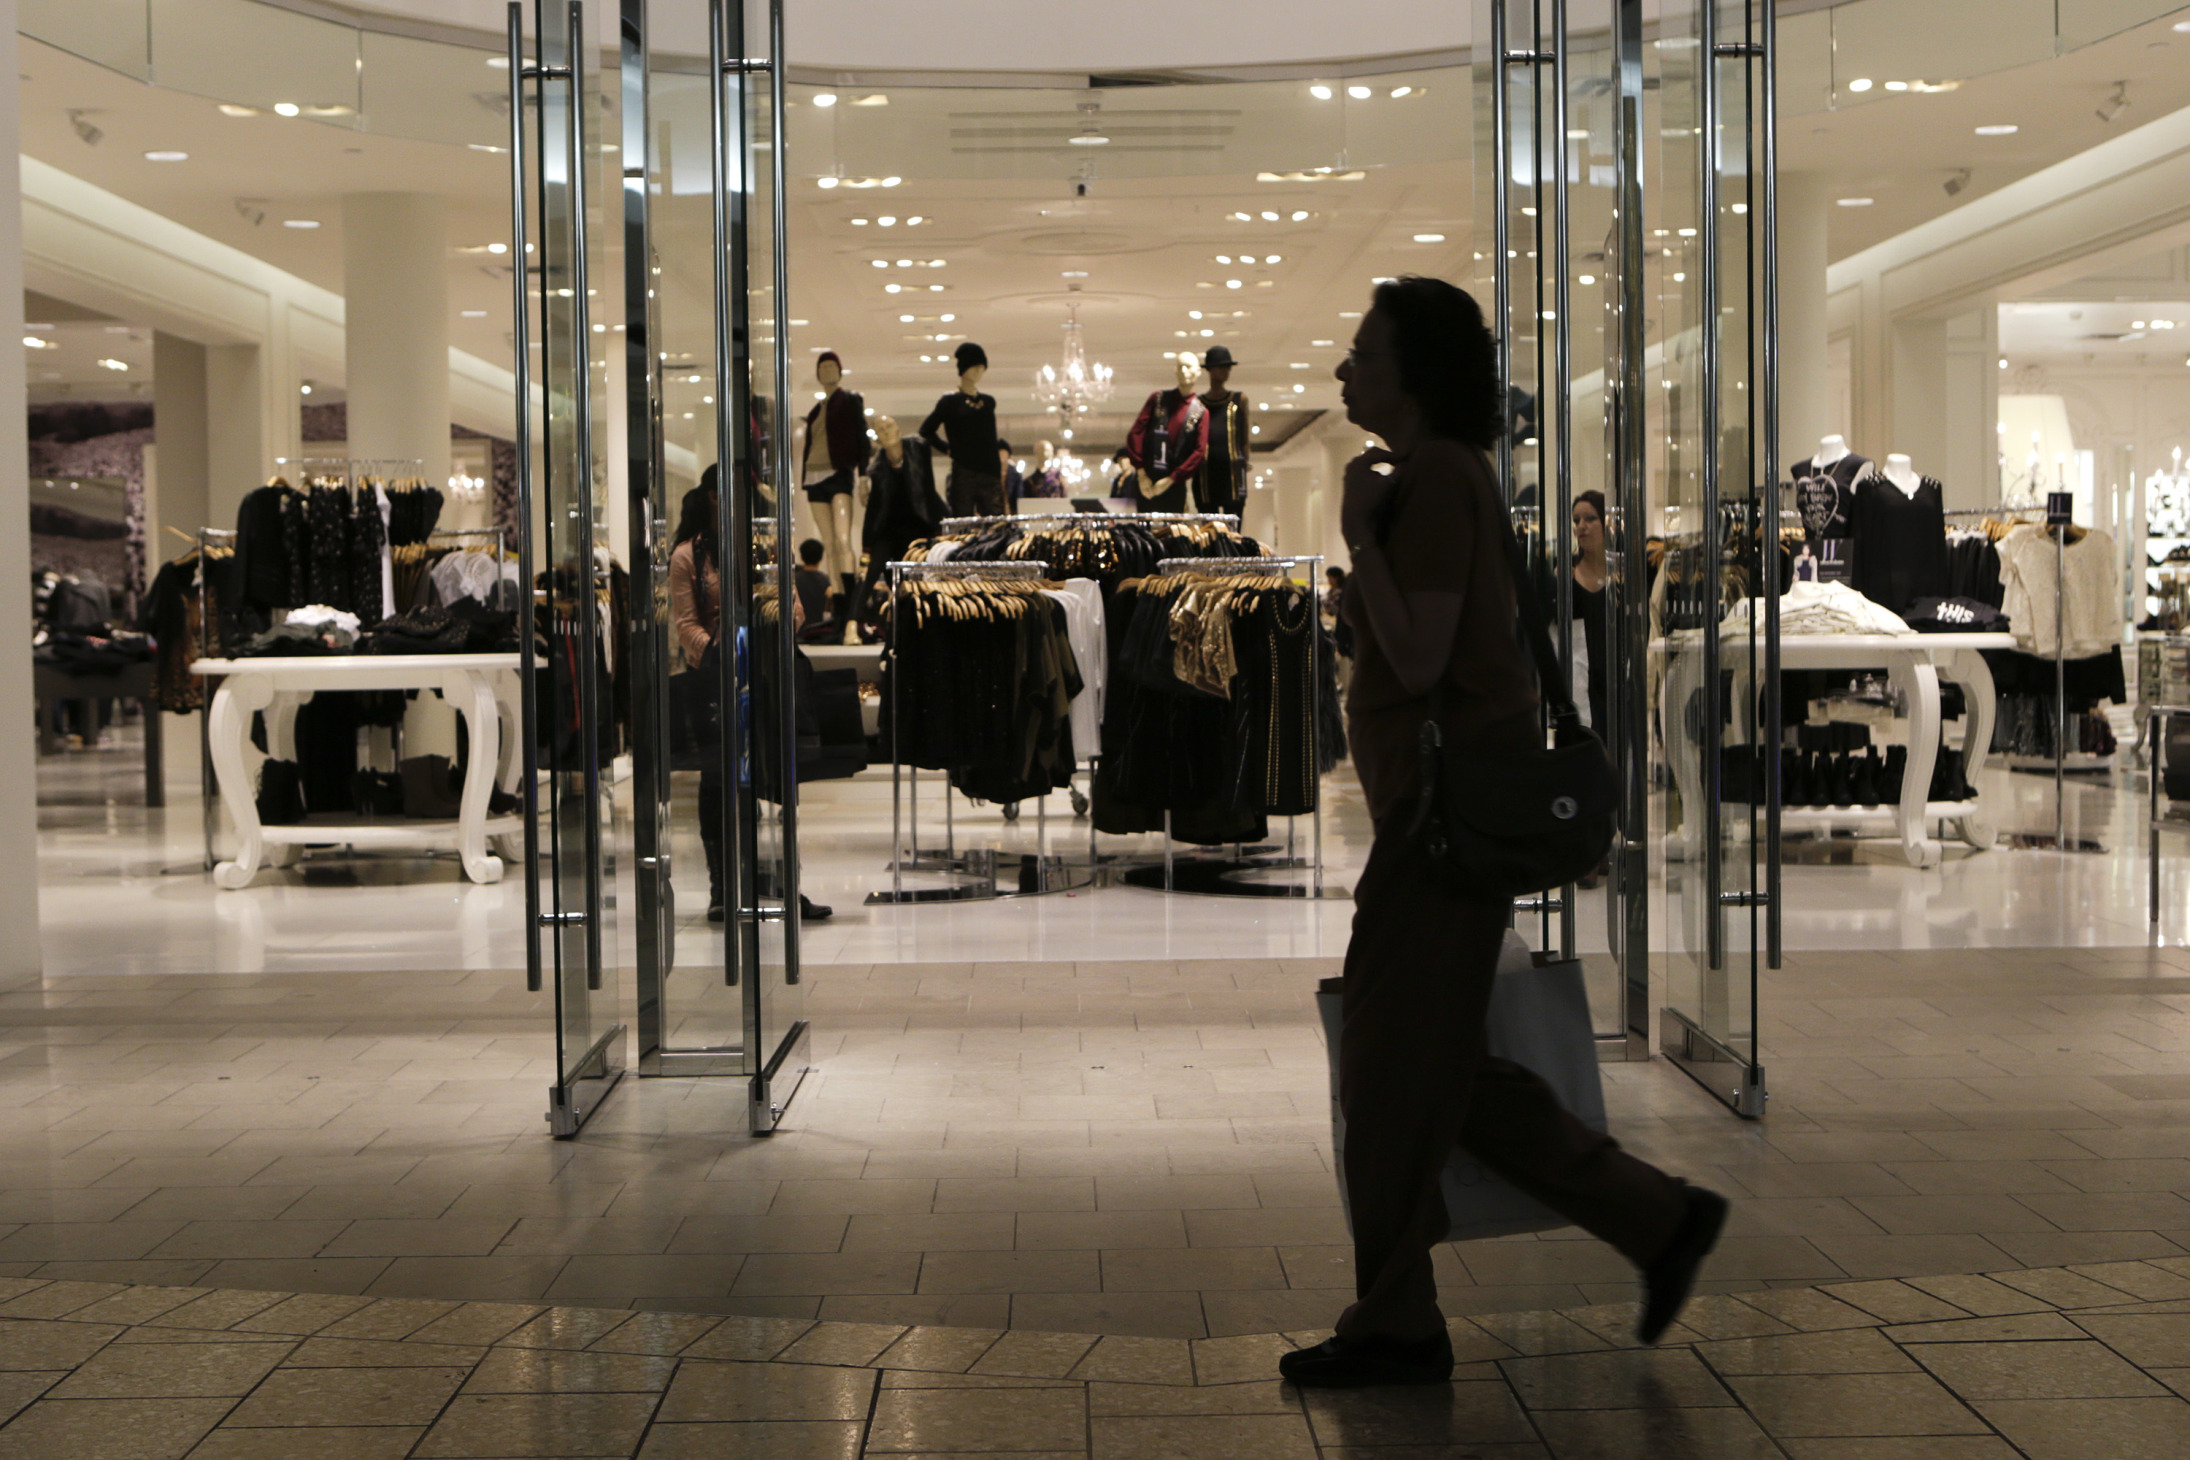 Apocalypse Looms Over U.S. Retail: UBS Issues Dire Report on Store Closures and Bankruptcies